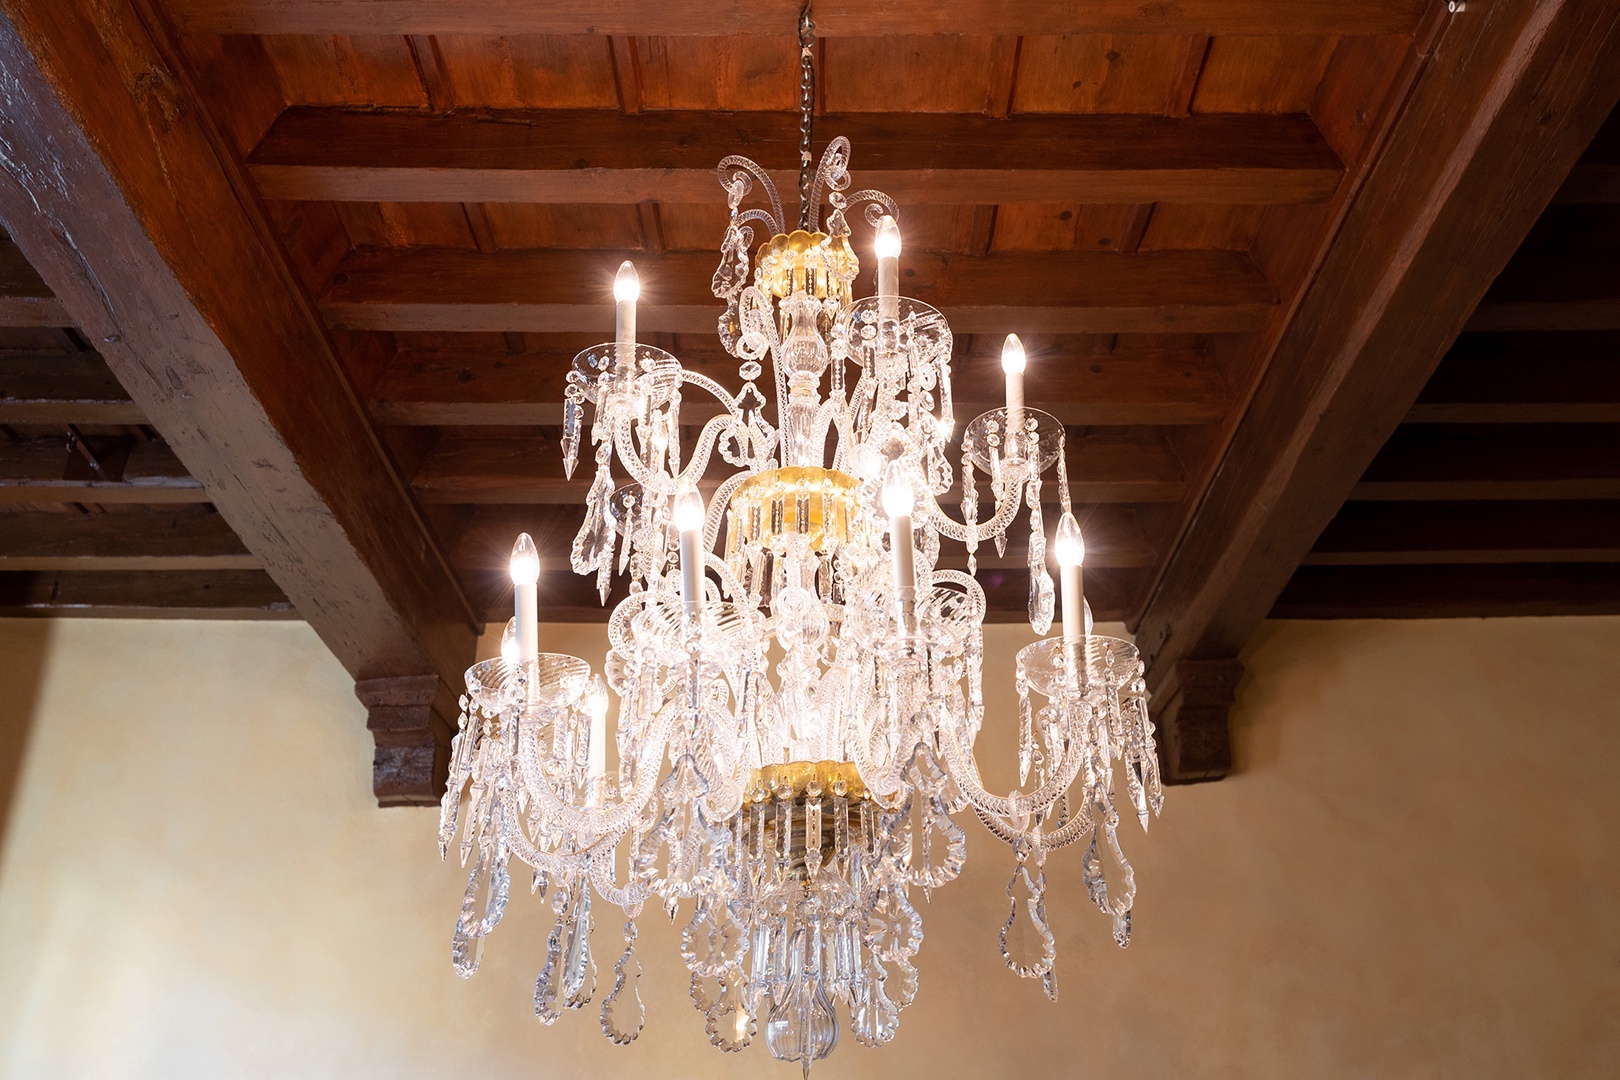 Chandelier of crystal from Murano in Venice.